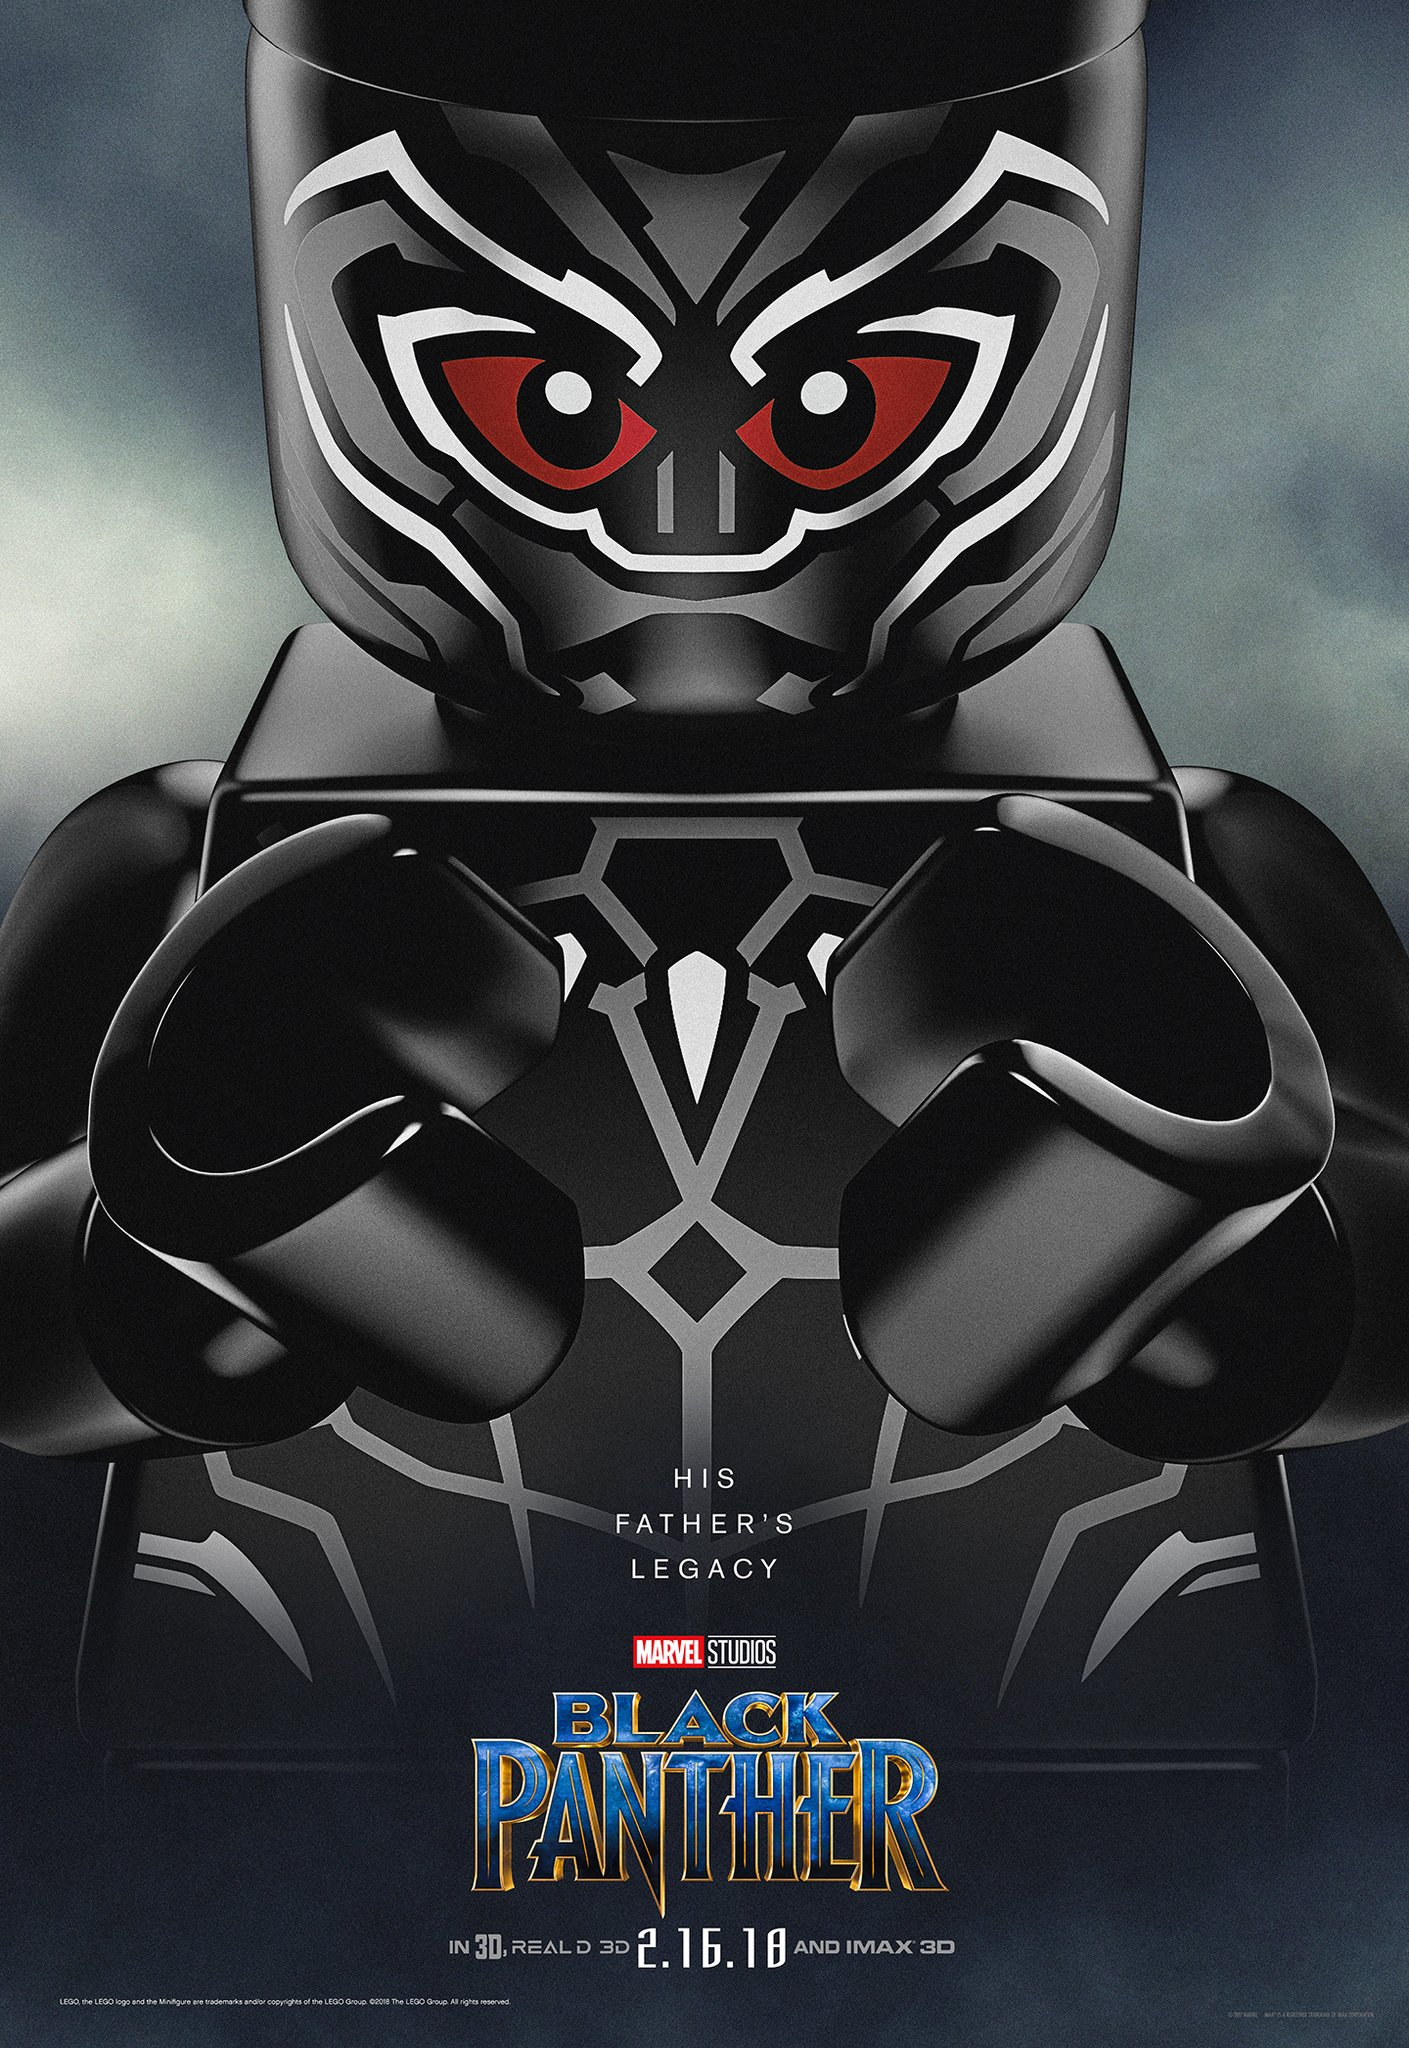 Image Black Panther Lego Posterpng Disney Wiki Fandom Powered By